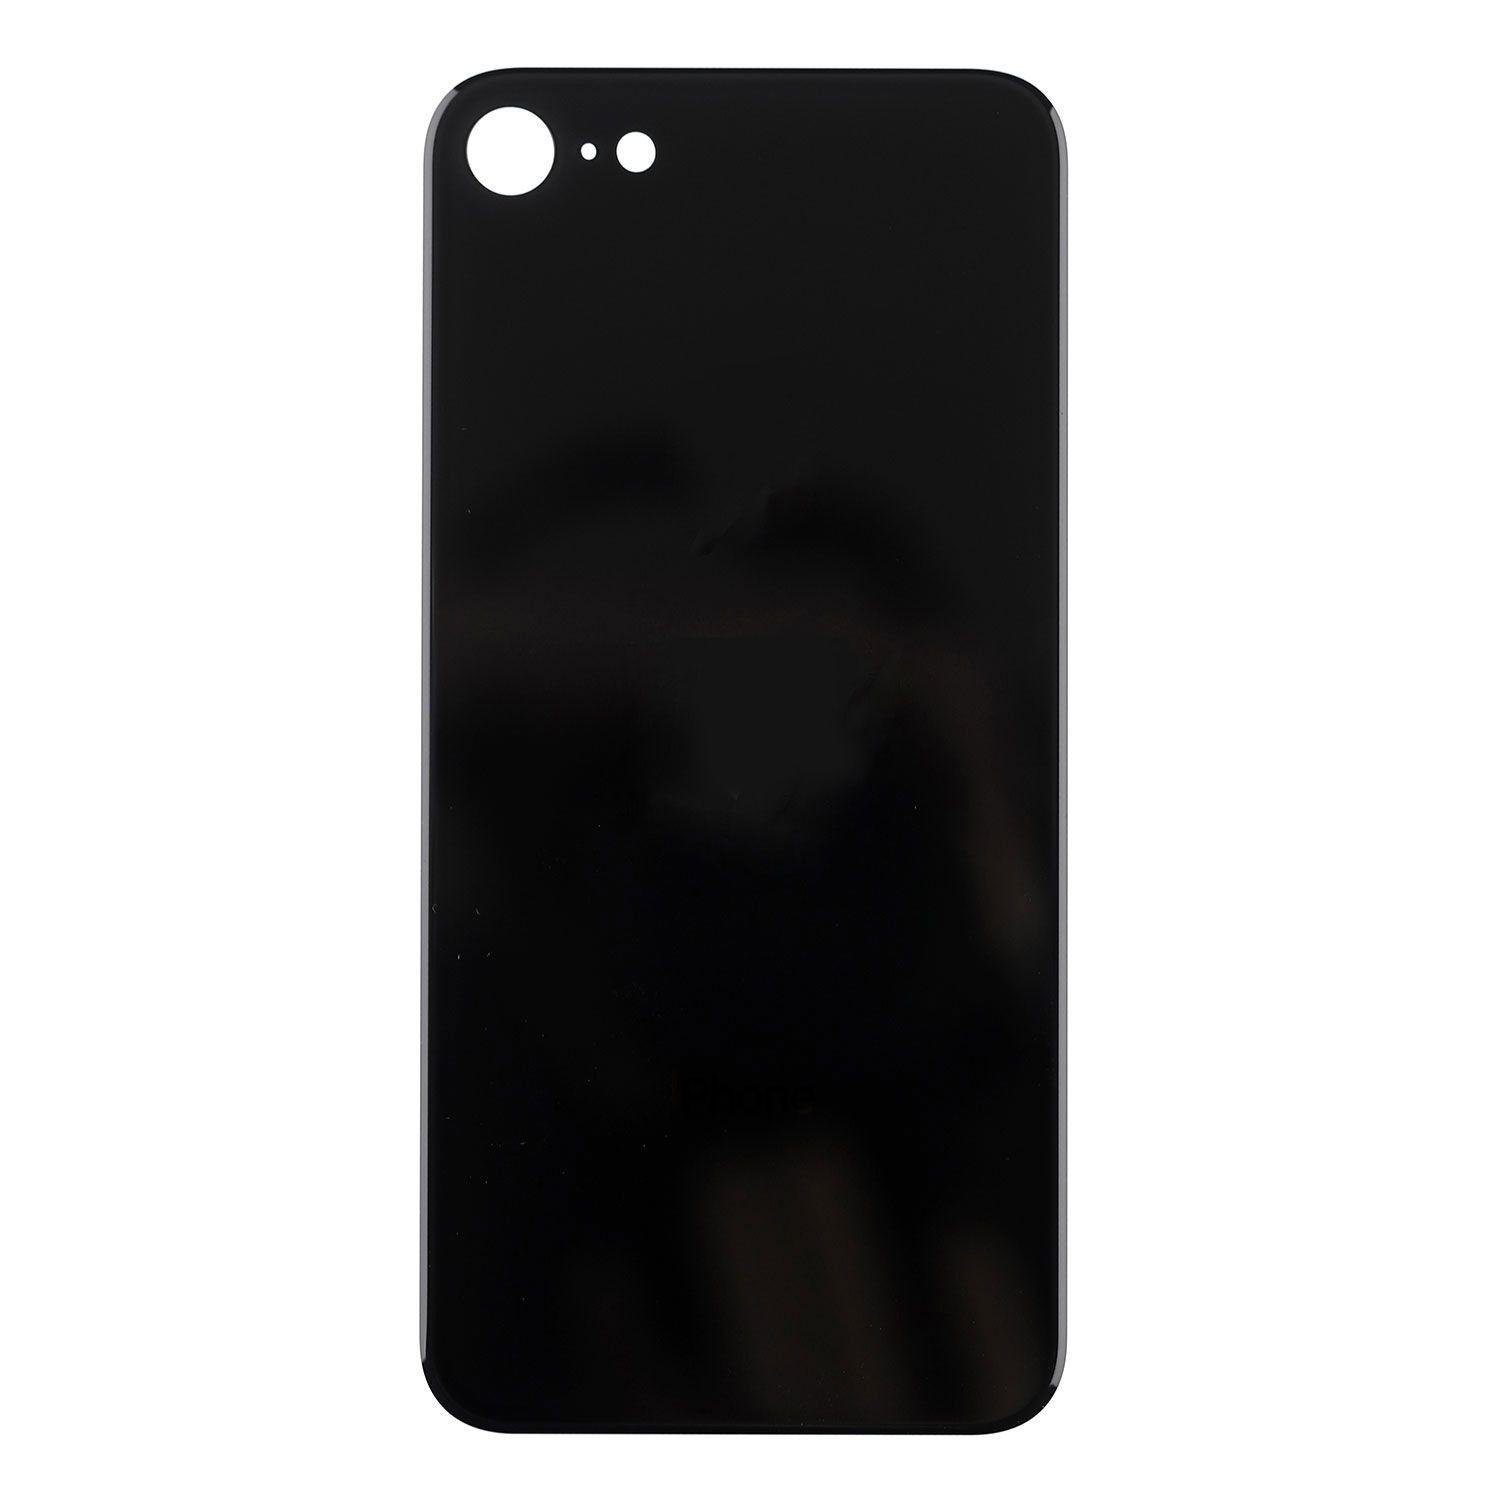 Battery cover iPhone SE 2020 with bigger hole for camera glass - black